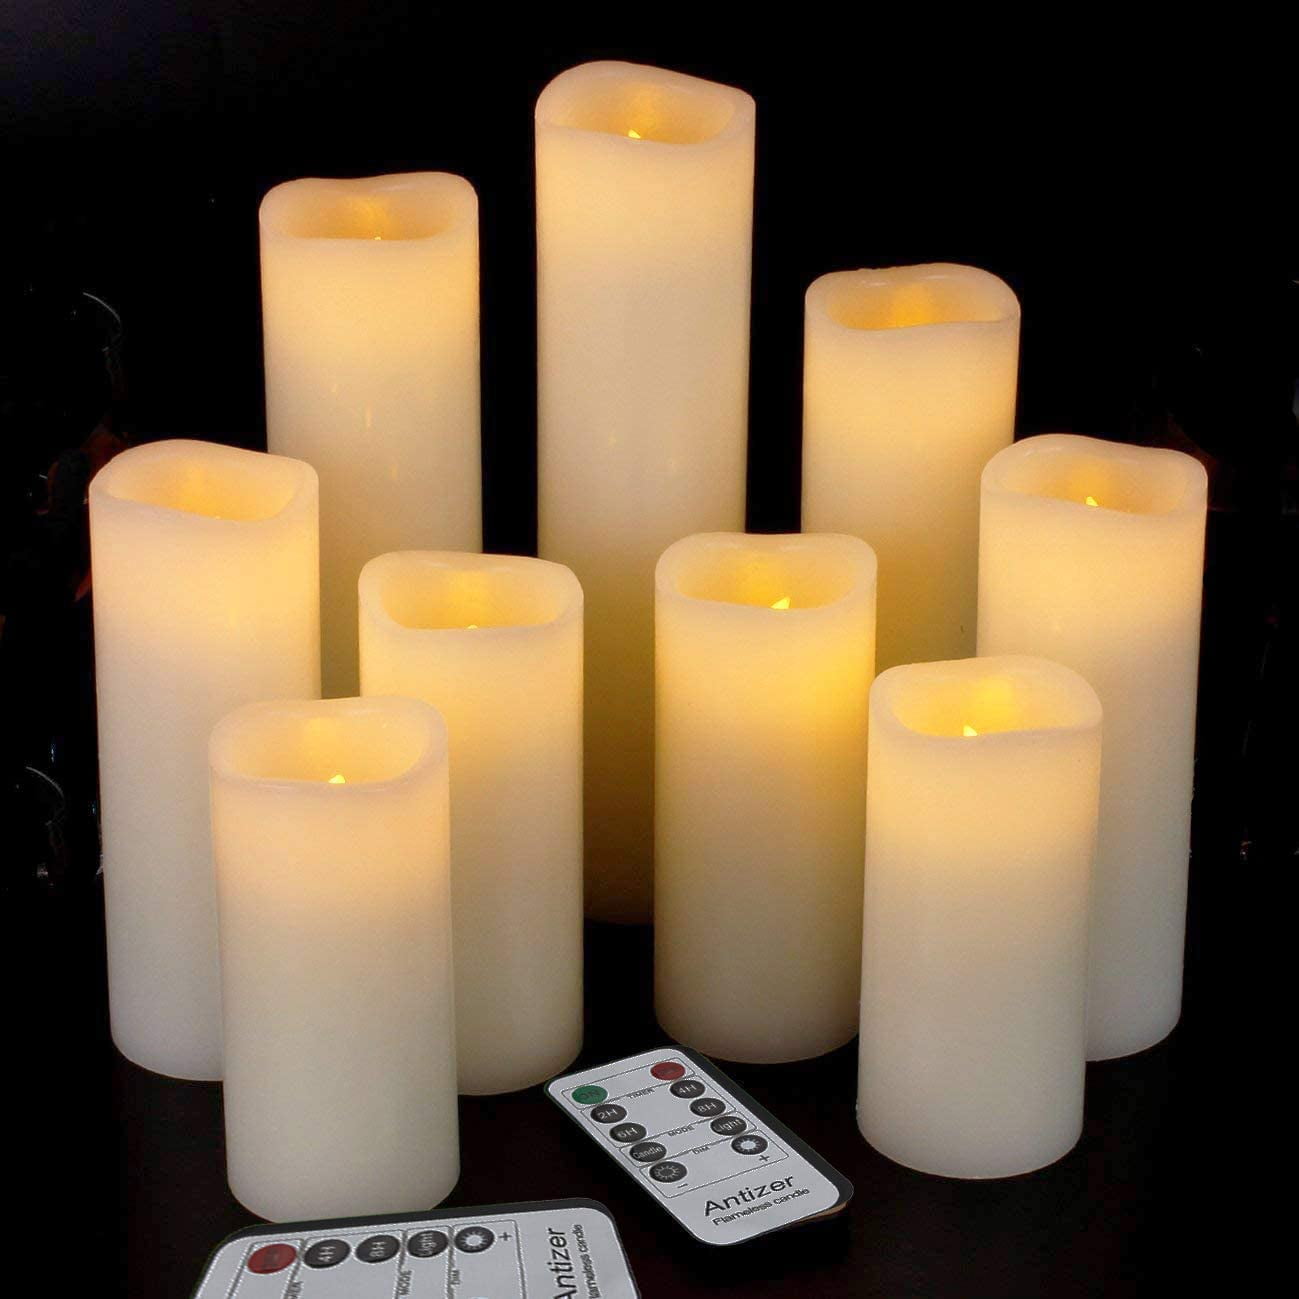 Antizer Flameless Candles Set of 9 Ivory Dripless Real Wax Pillars Include Realistic Dancing LED Flames and 10-Key Remote Control with 24-Hour Timer Function 400 Hours by 2 AA Batteries 